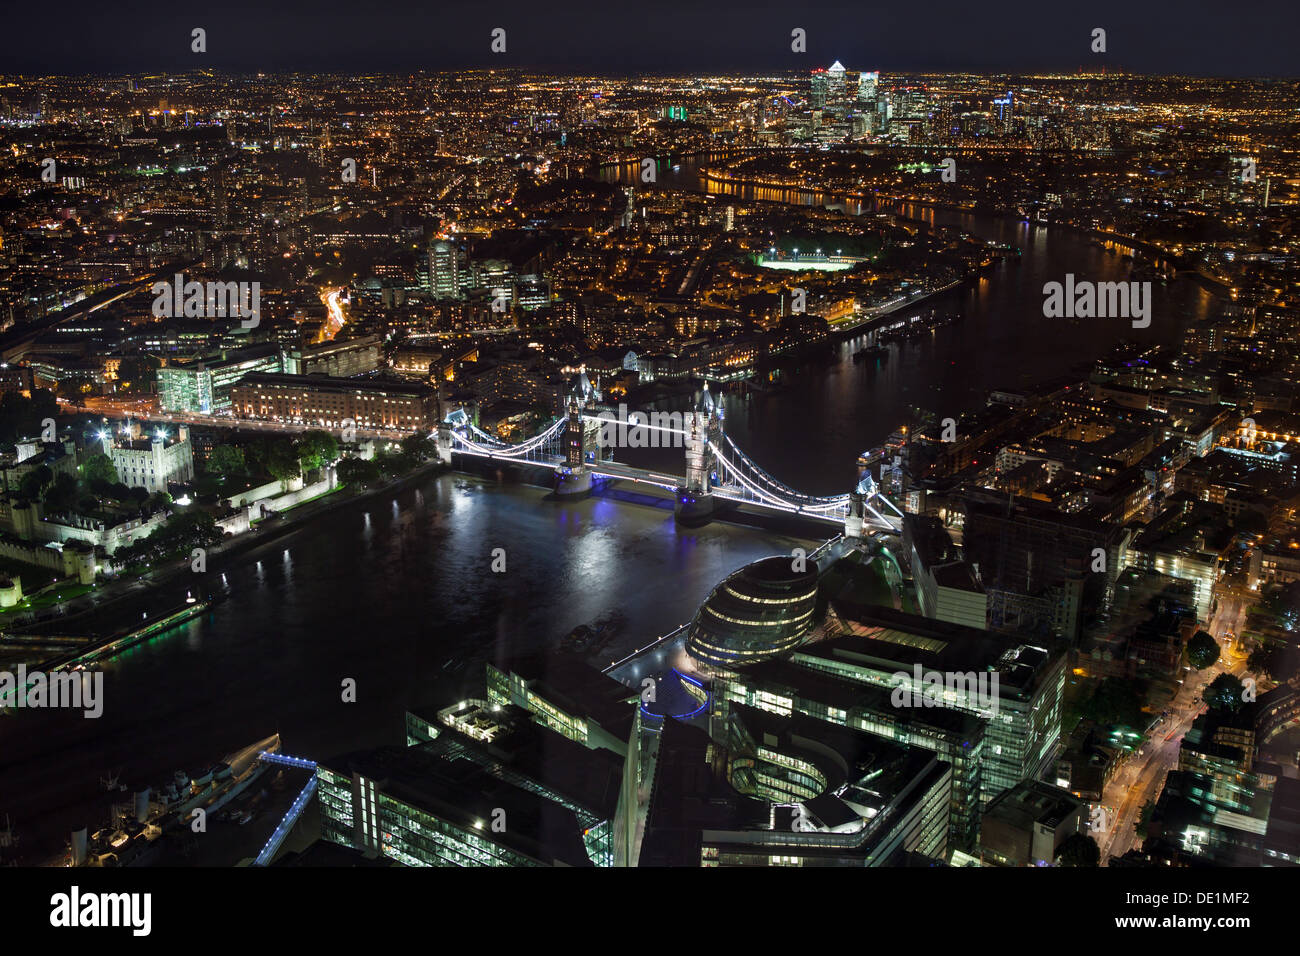 Elevated view of London at night Stock Photo